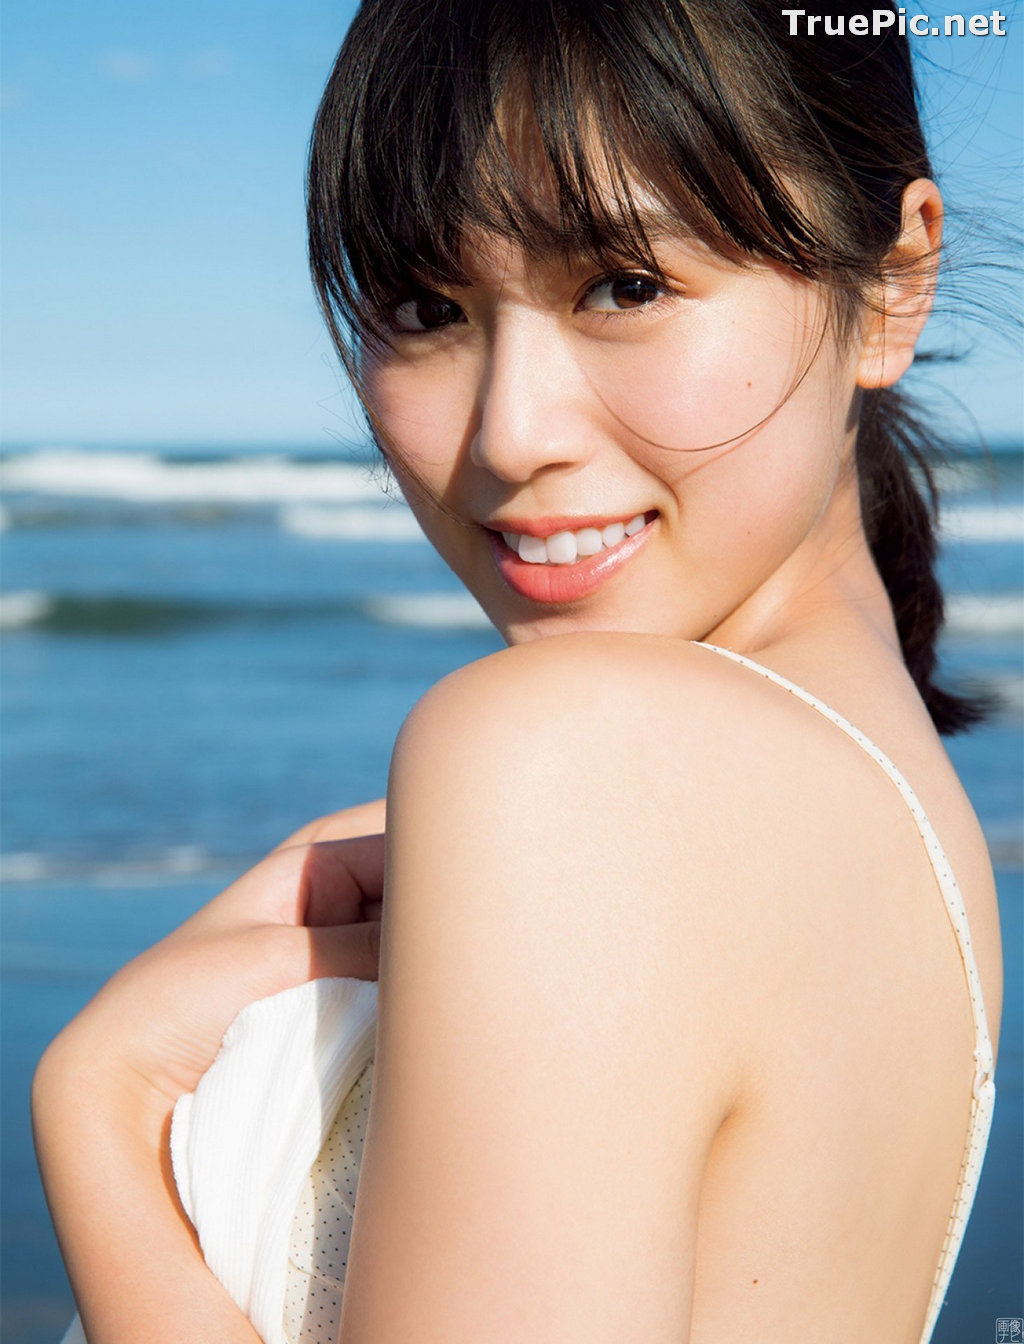 ImageJapanese Gravure Idol and Actress - Kitamuki Miyu (北向珠夕) - Sexy Picture Collection 2020 - TruePic.net - Picture-21